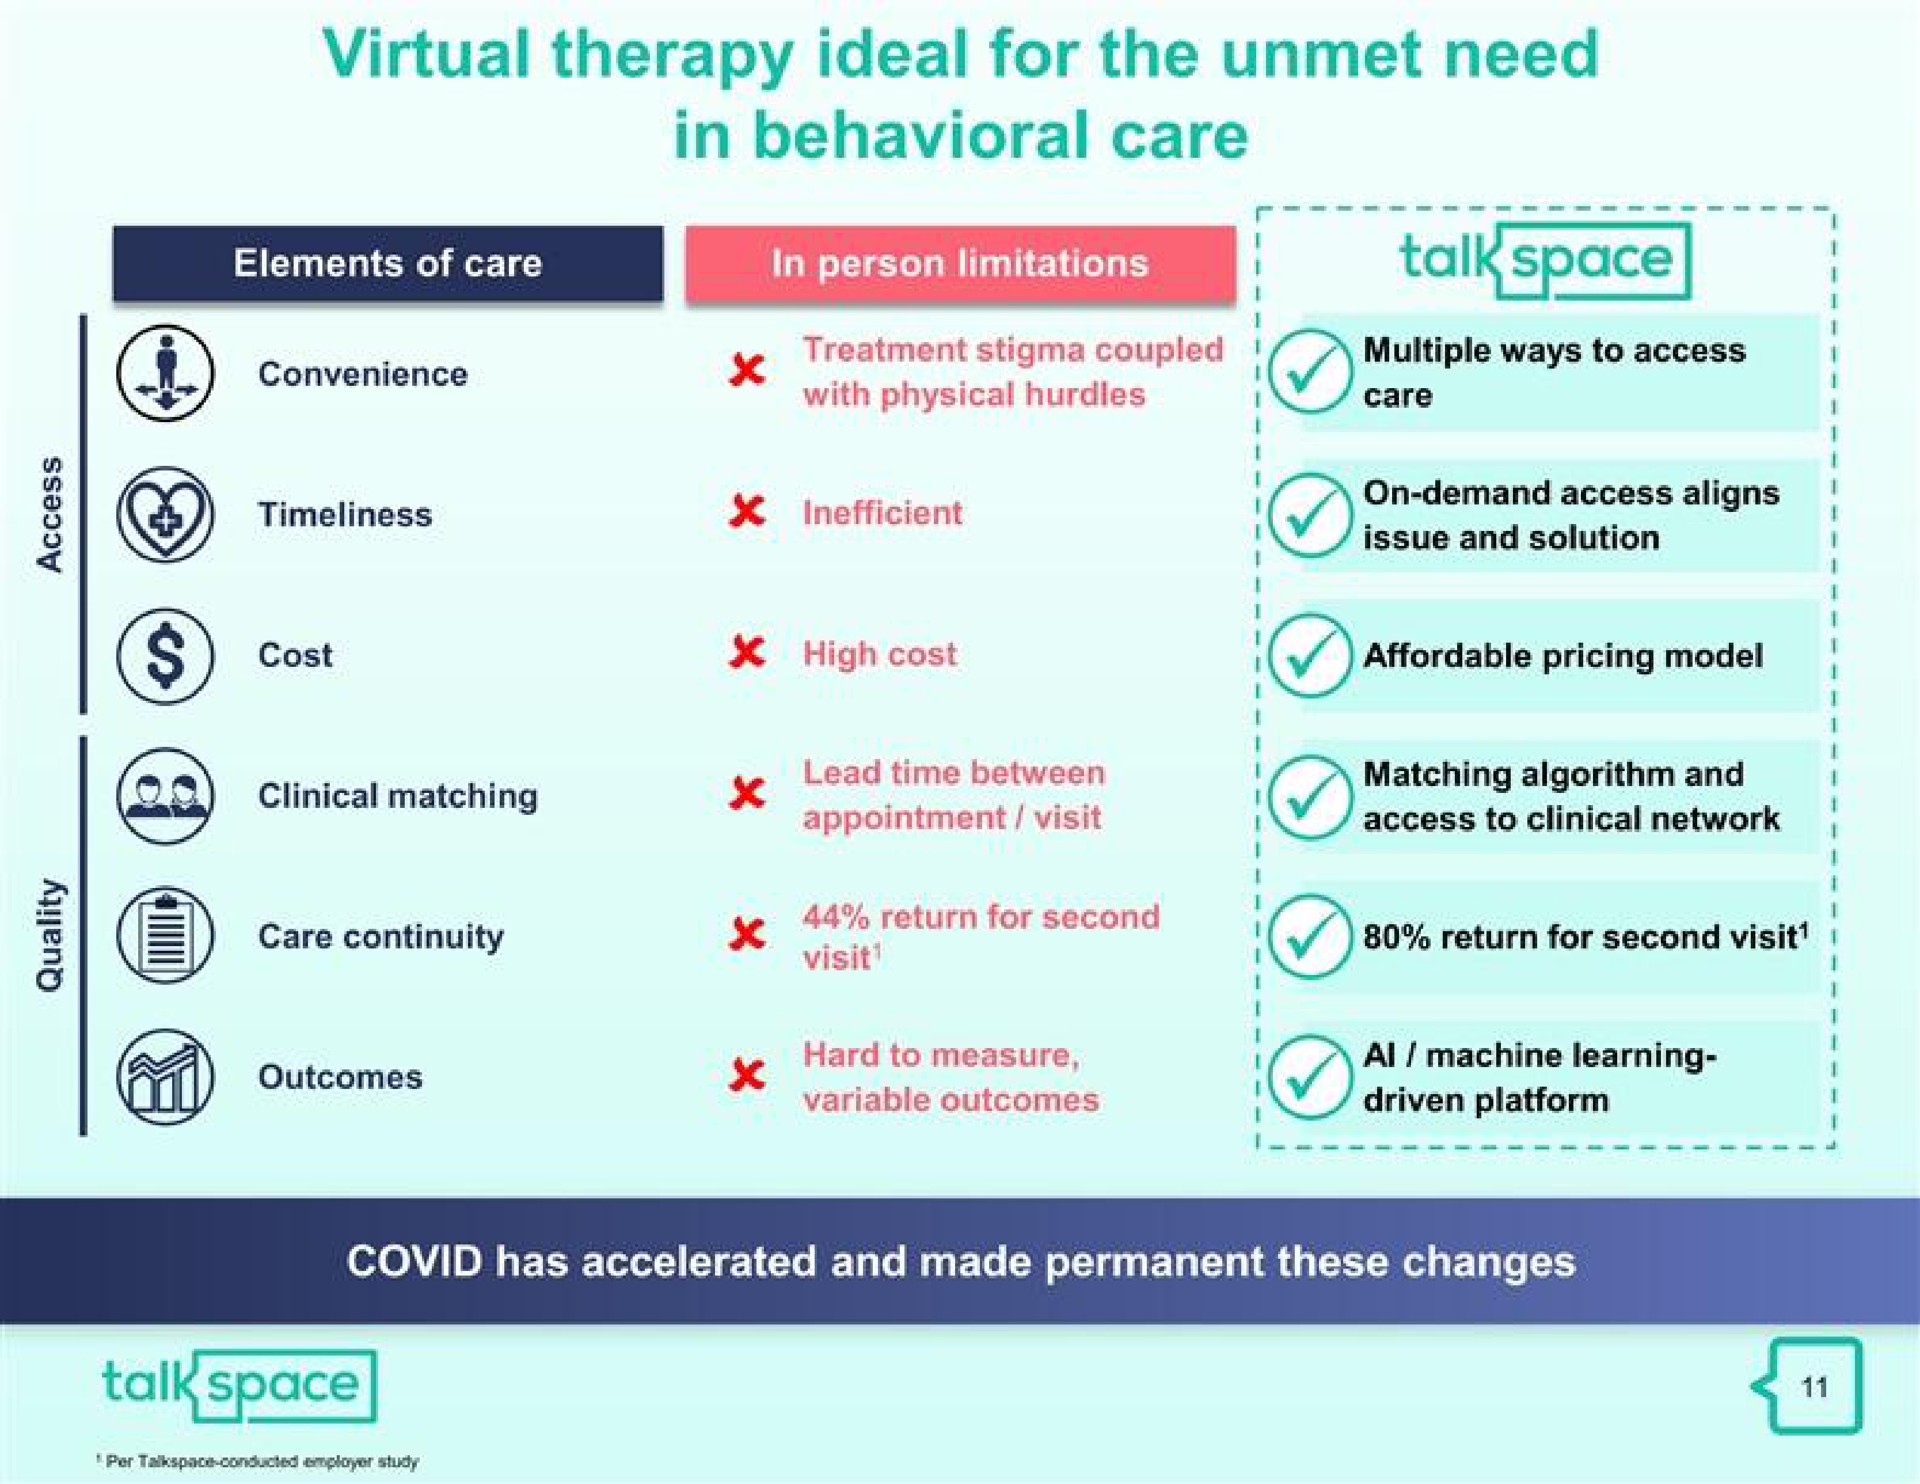 virtual therapy ideal for the unmet need in behavioral care | Talkspace